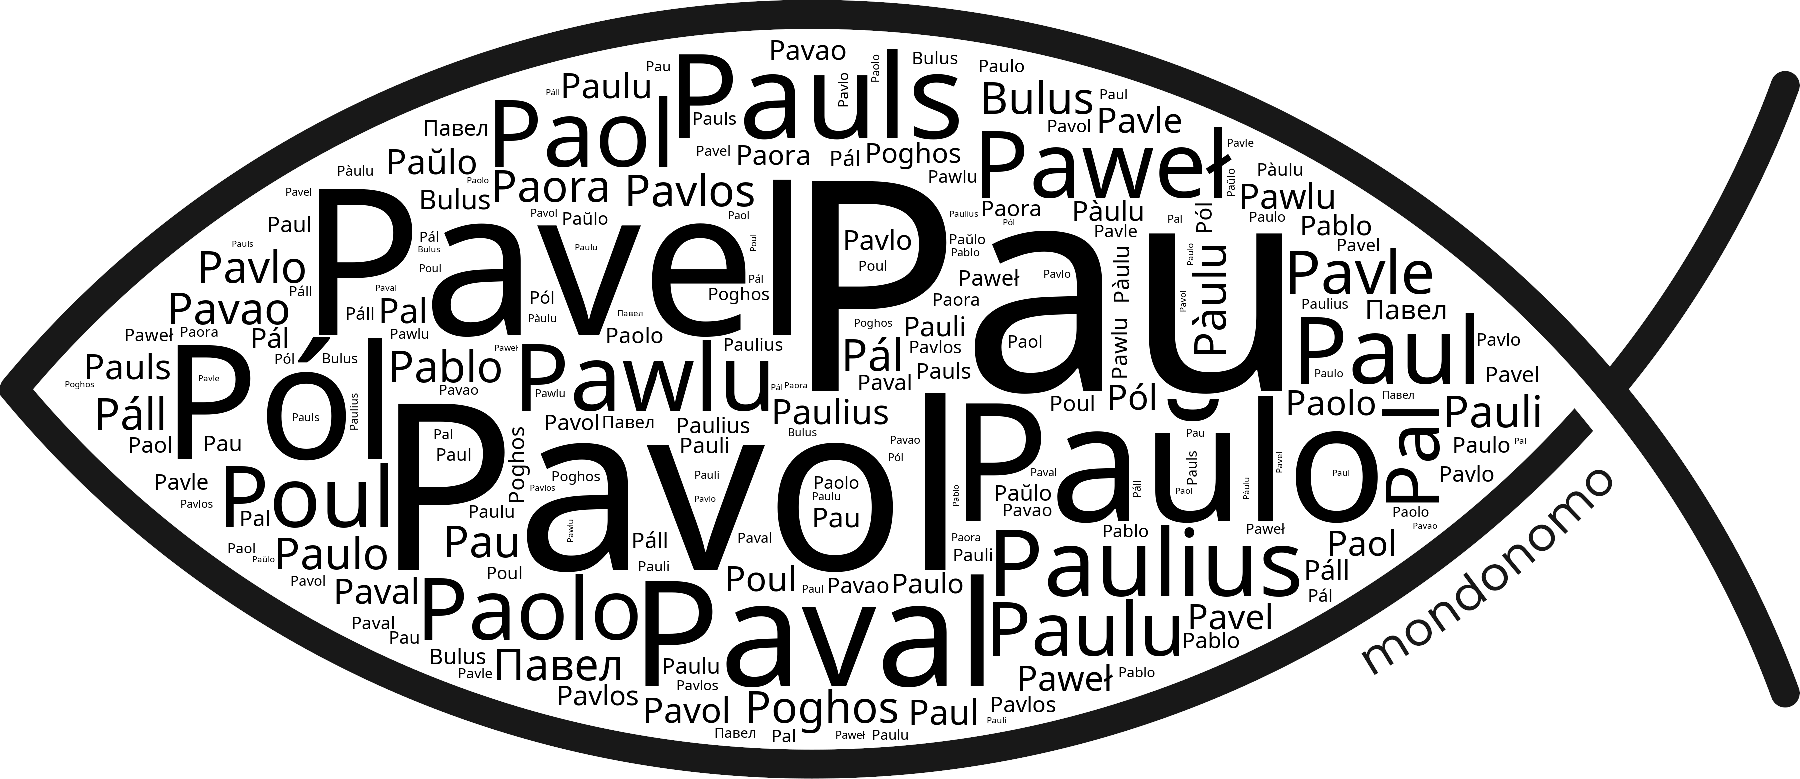 Name Pau in the world's Bibles